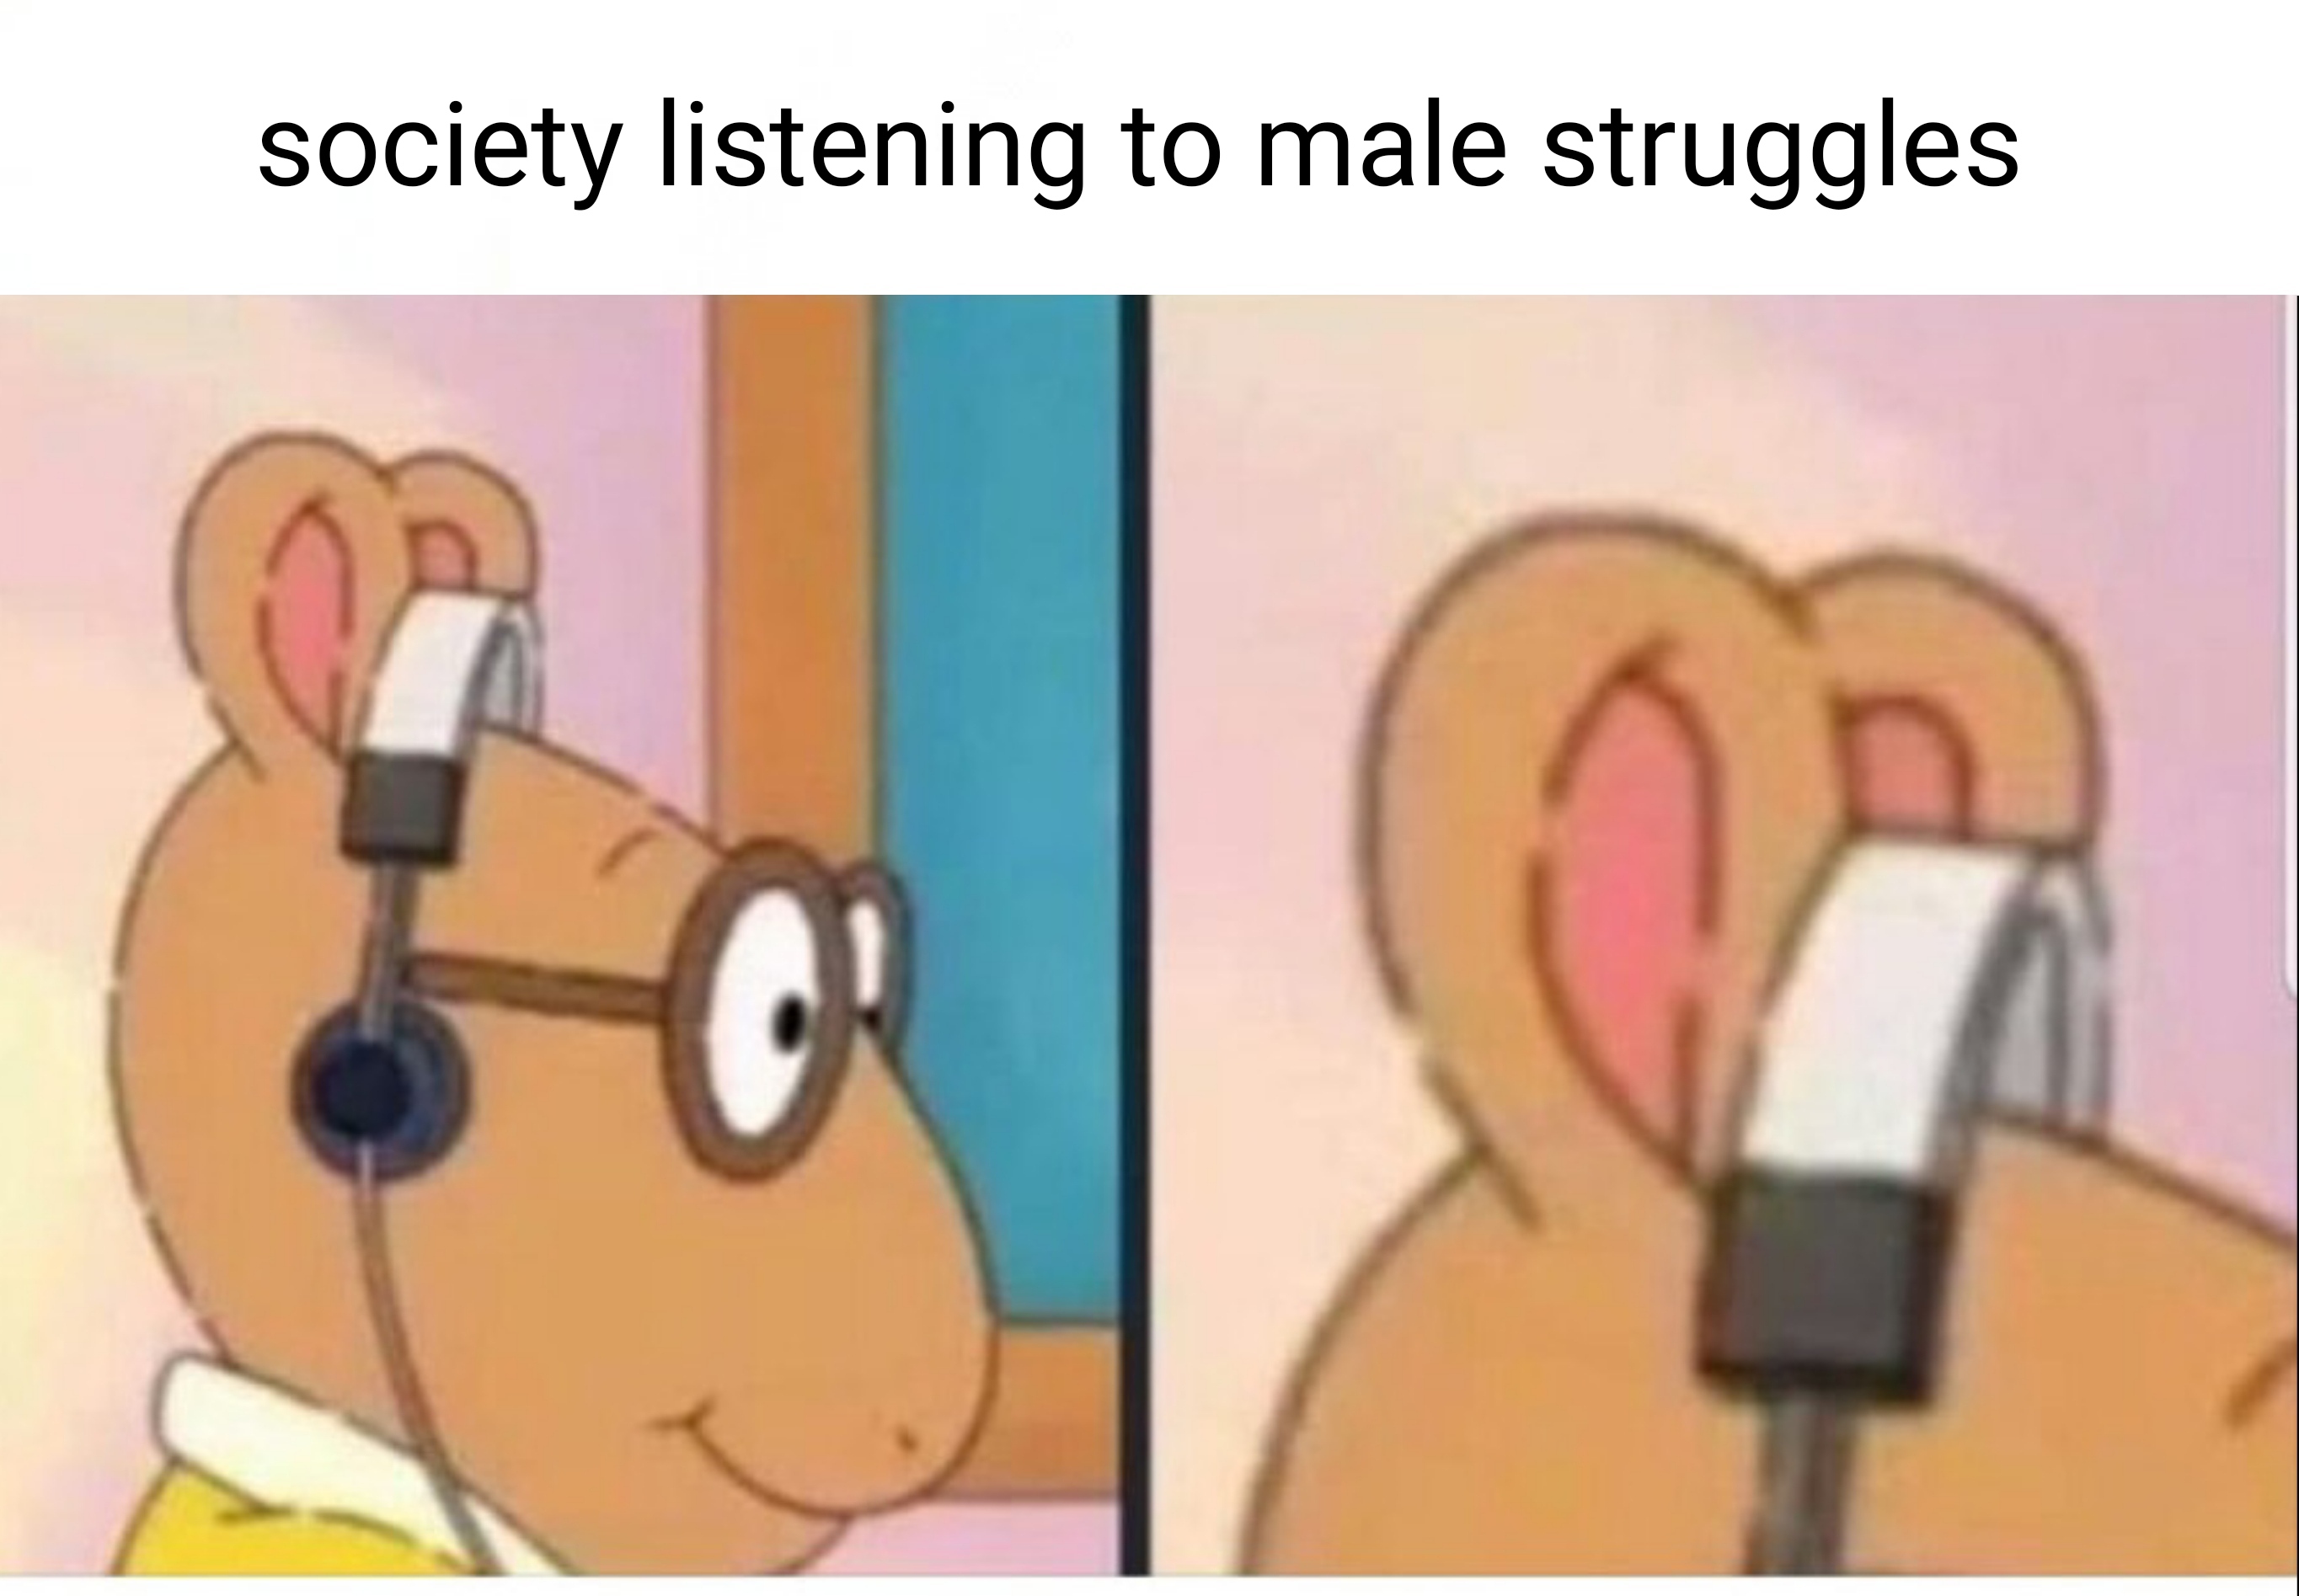 dank memes and pics - me listening to my own advice meme - society listening to male struggles